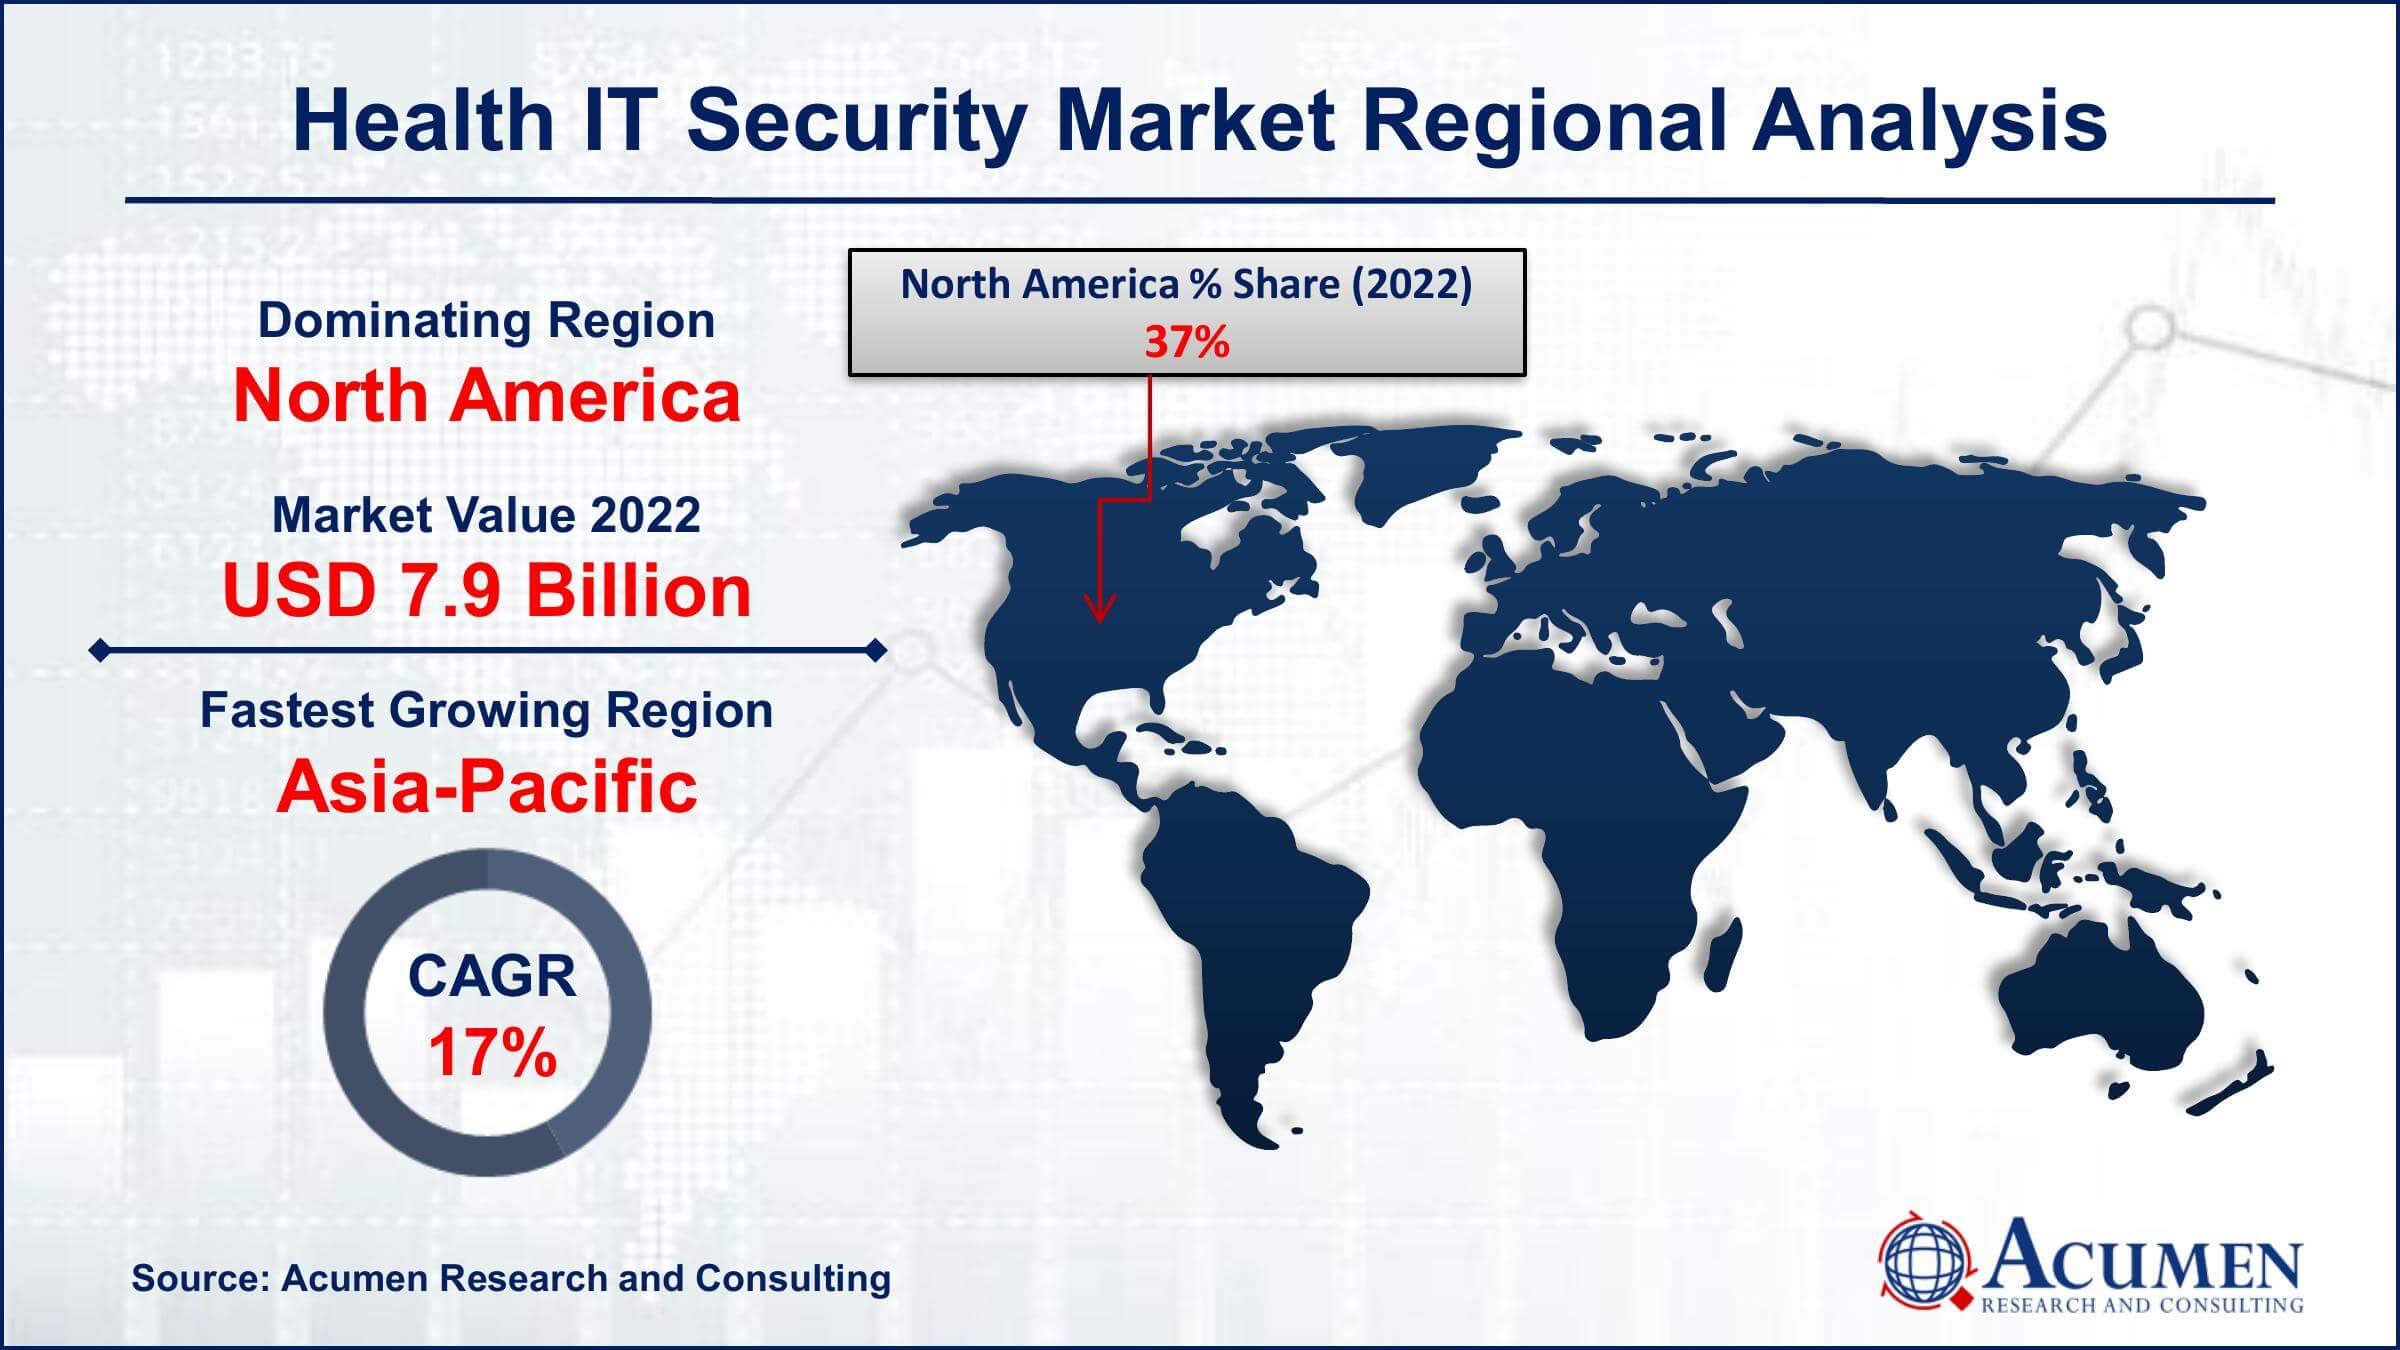 Health IT Security Market Drivers